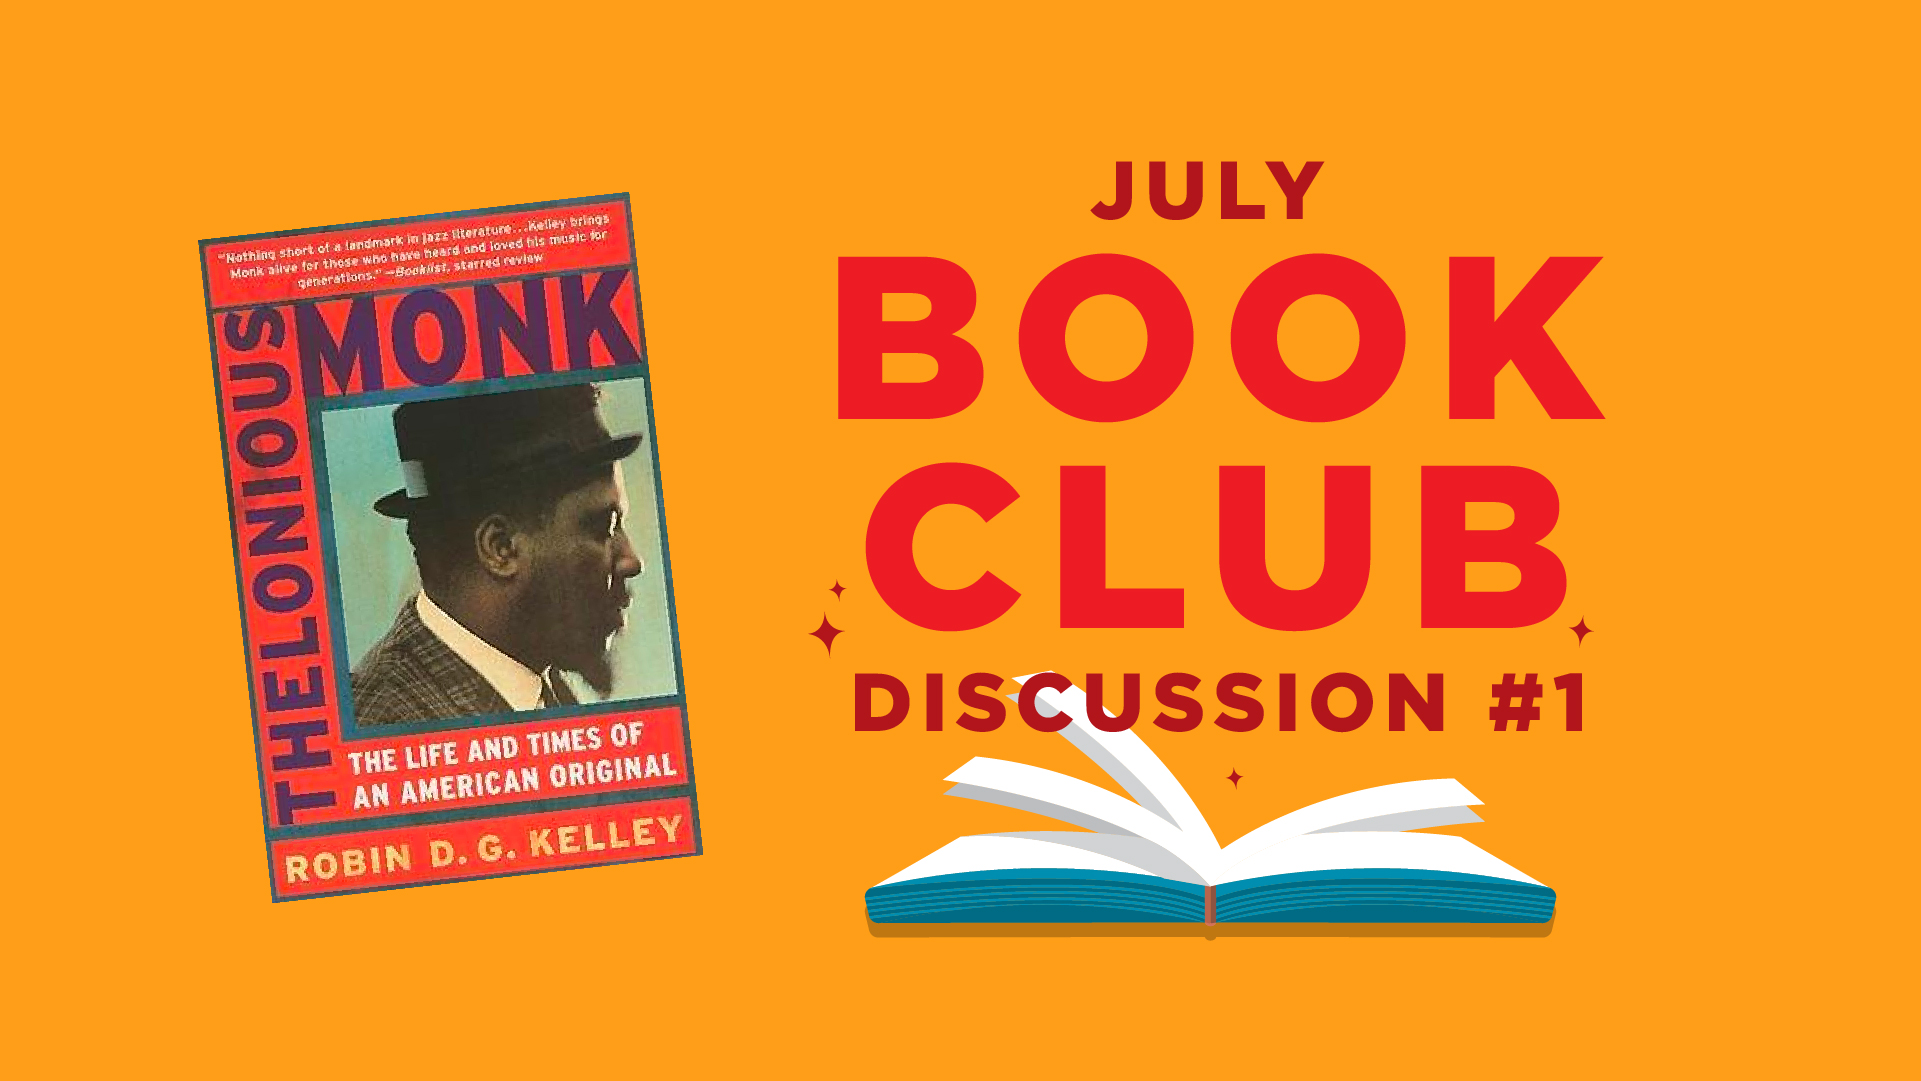 July Book Club Discussion #1 - The Lonious Monk, The Life and Time of and American Original by Robin D. G. Kelley